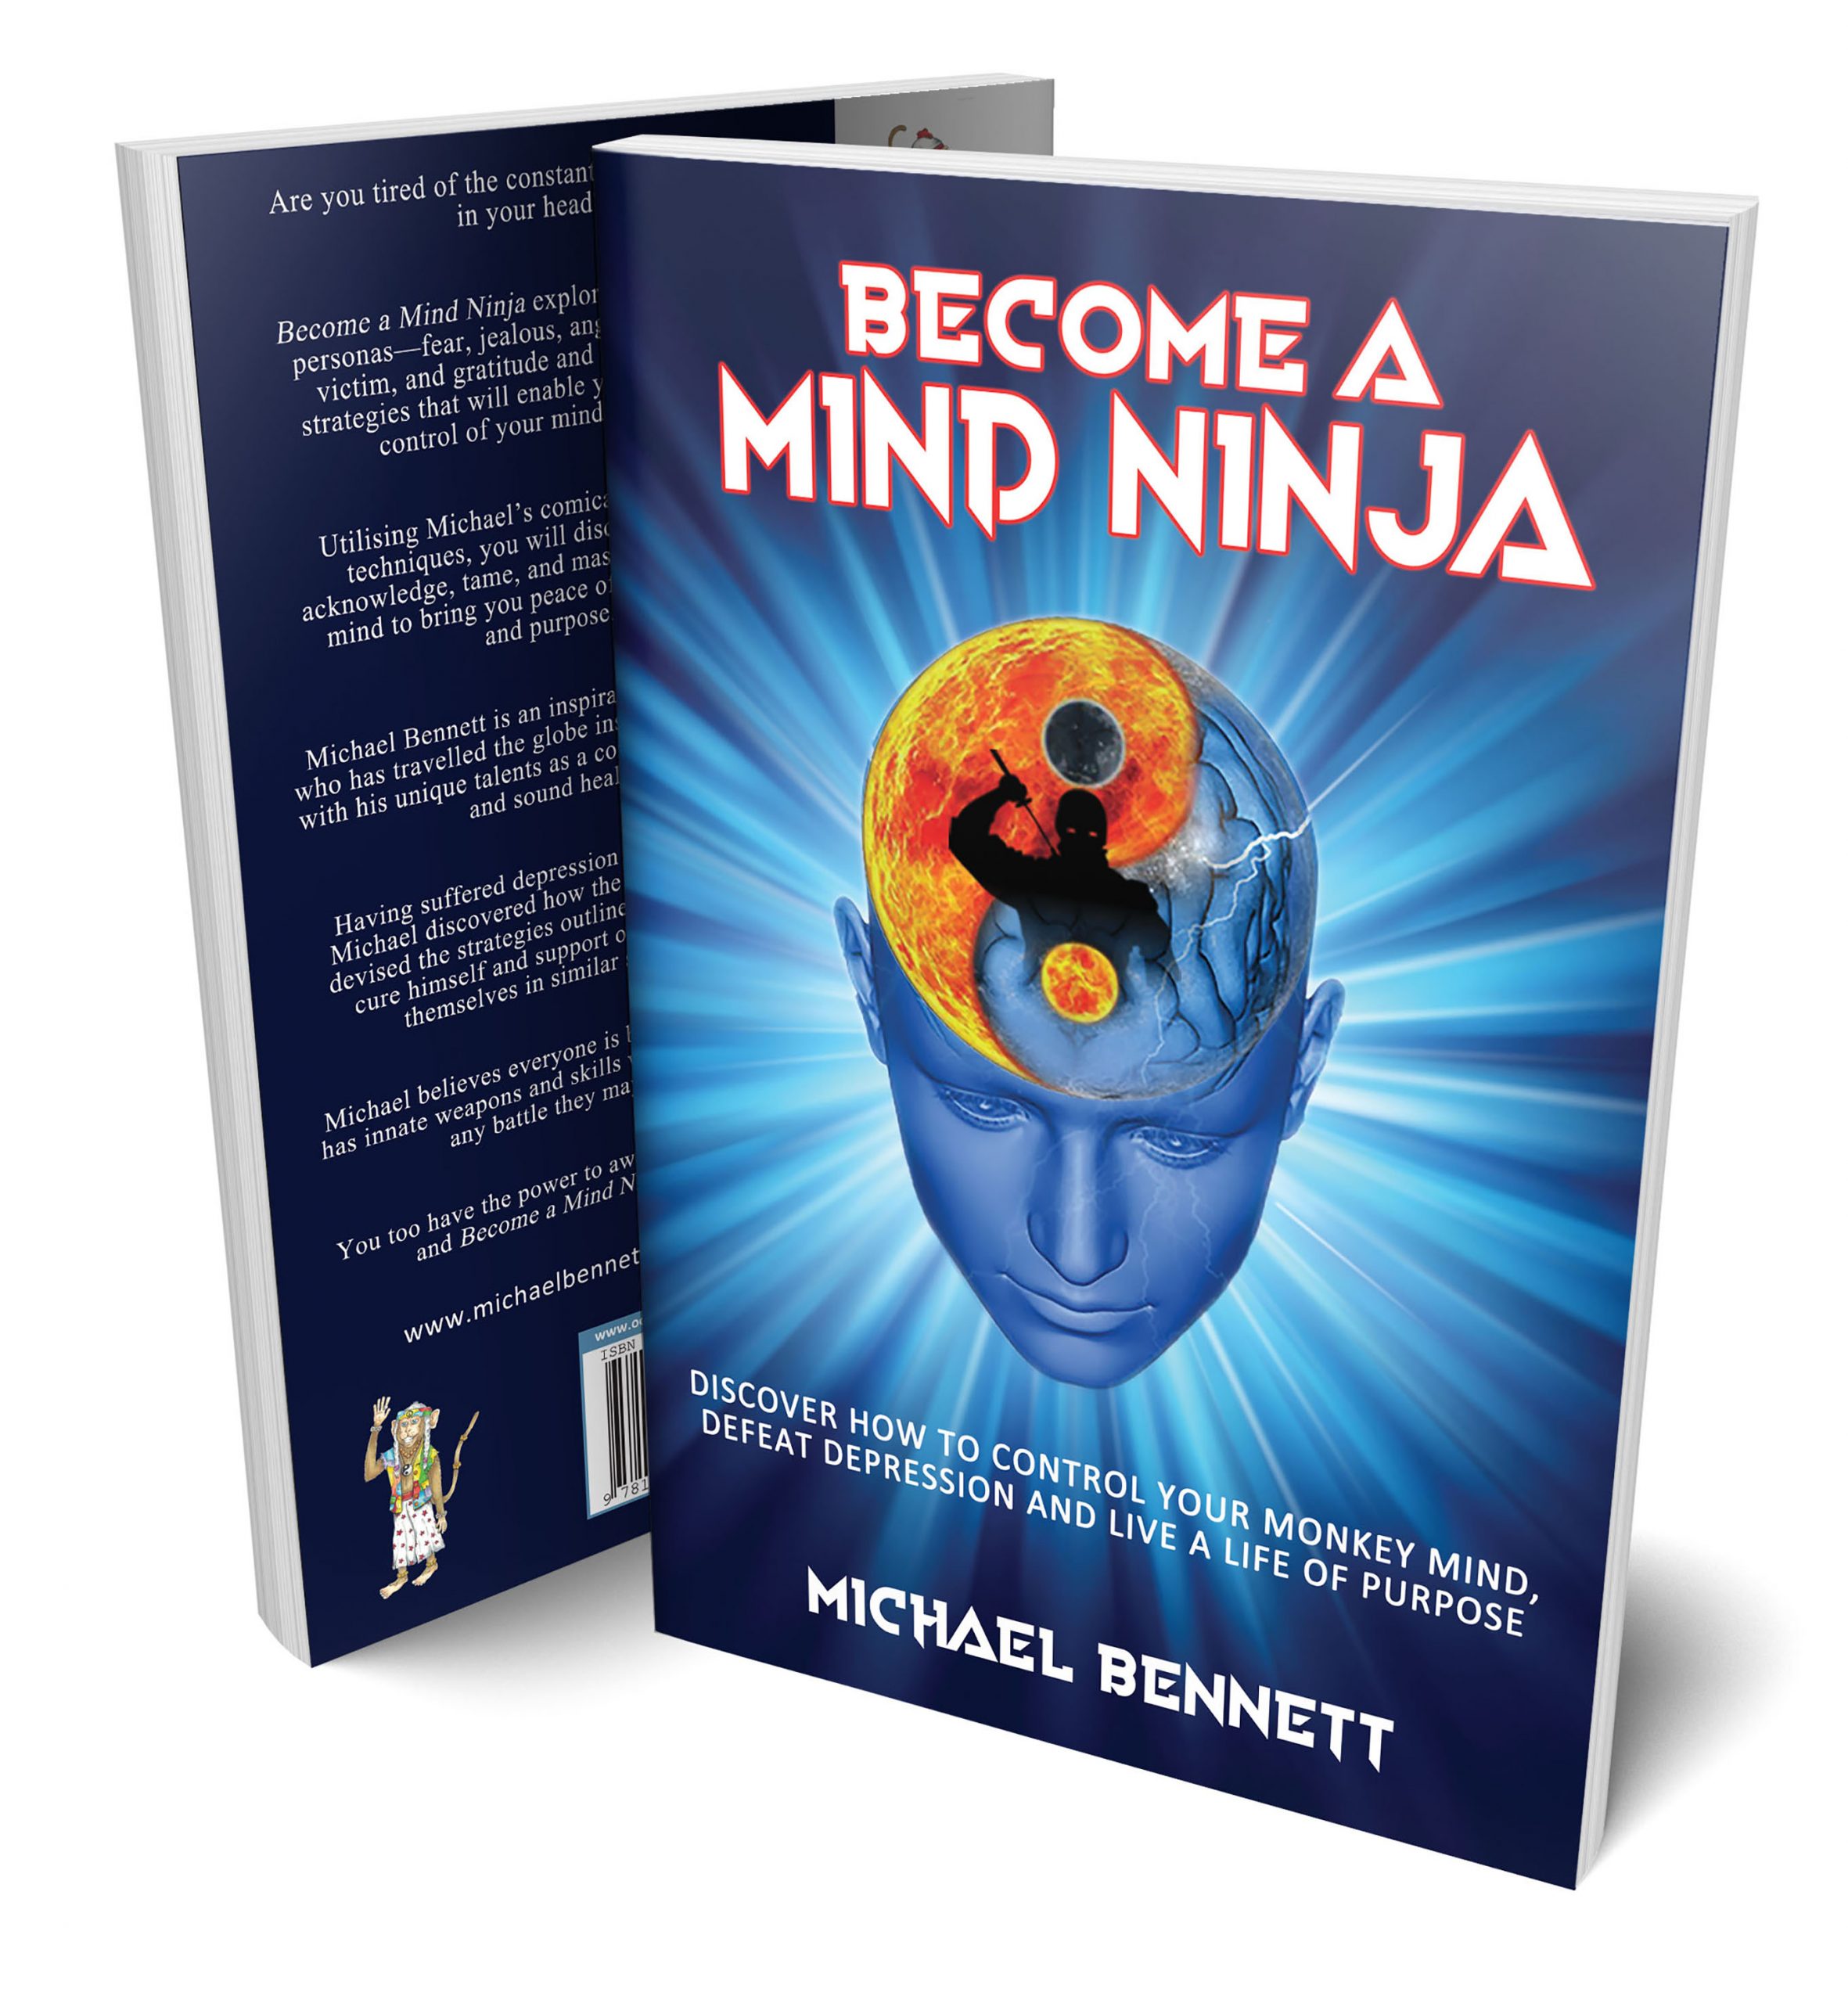 Utilising Michael’s comical visualisation techniques, you will discover how to acknowledge, tame, and master your monk